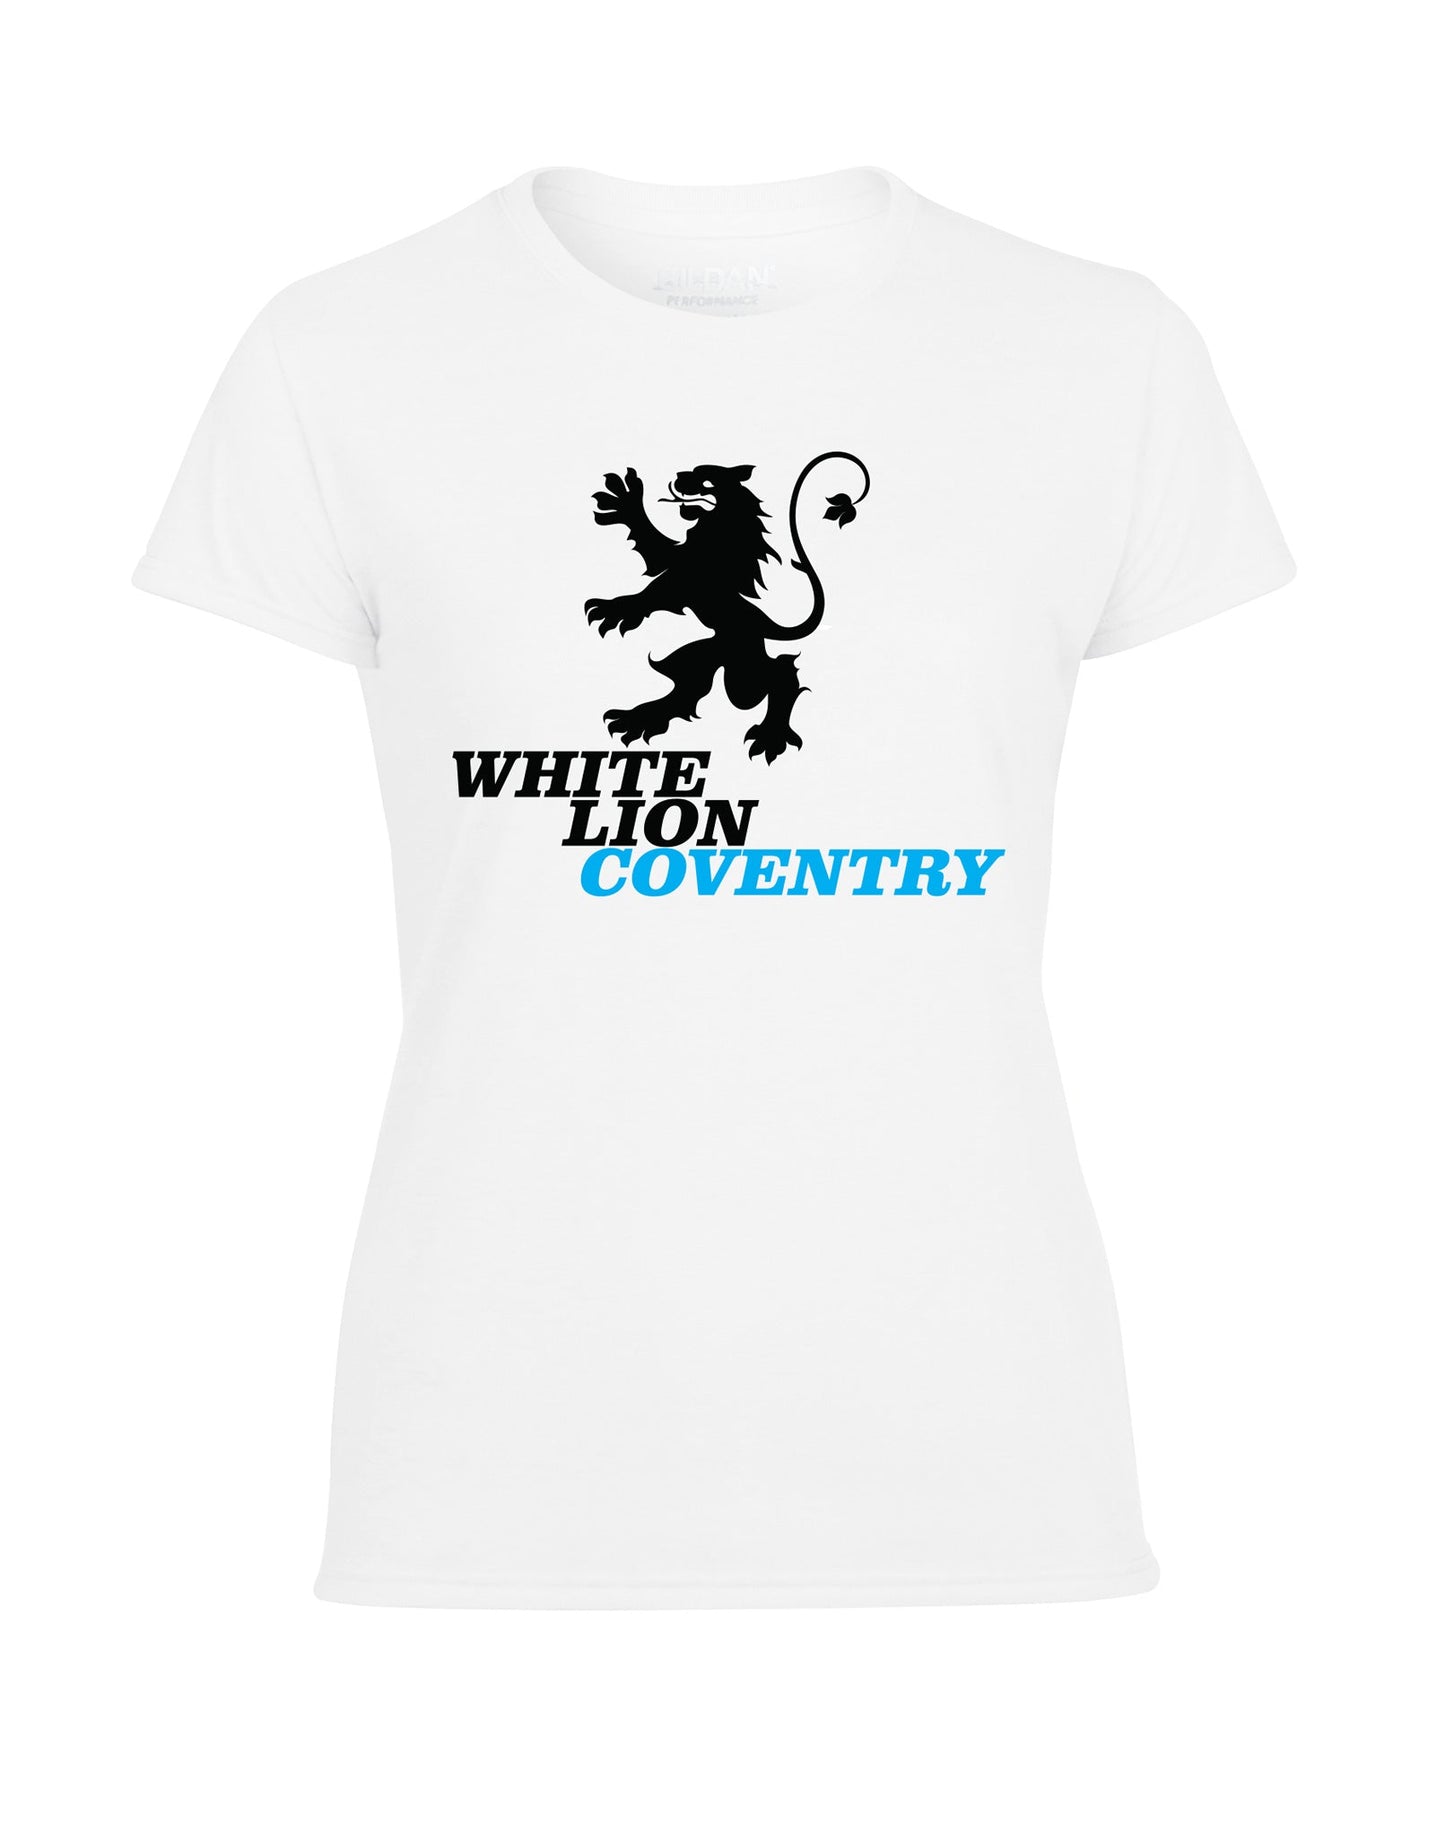 White Lion Coventry ladies fit t-shirt - various colours - Dirty Stop Outs